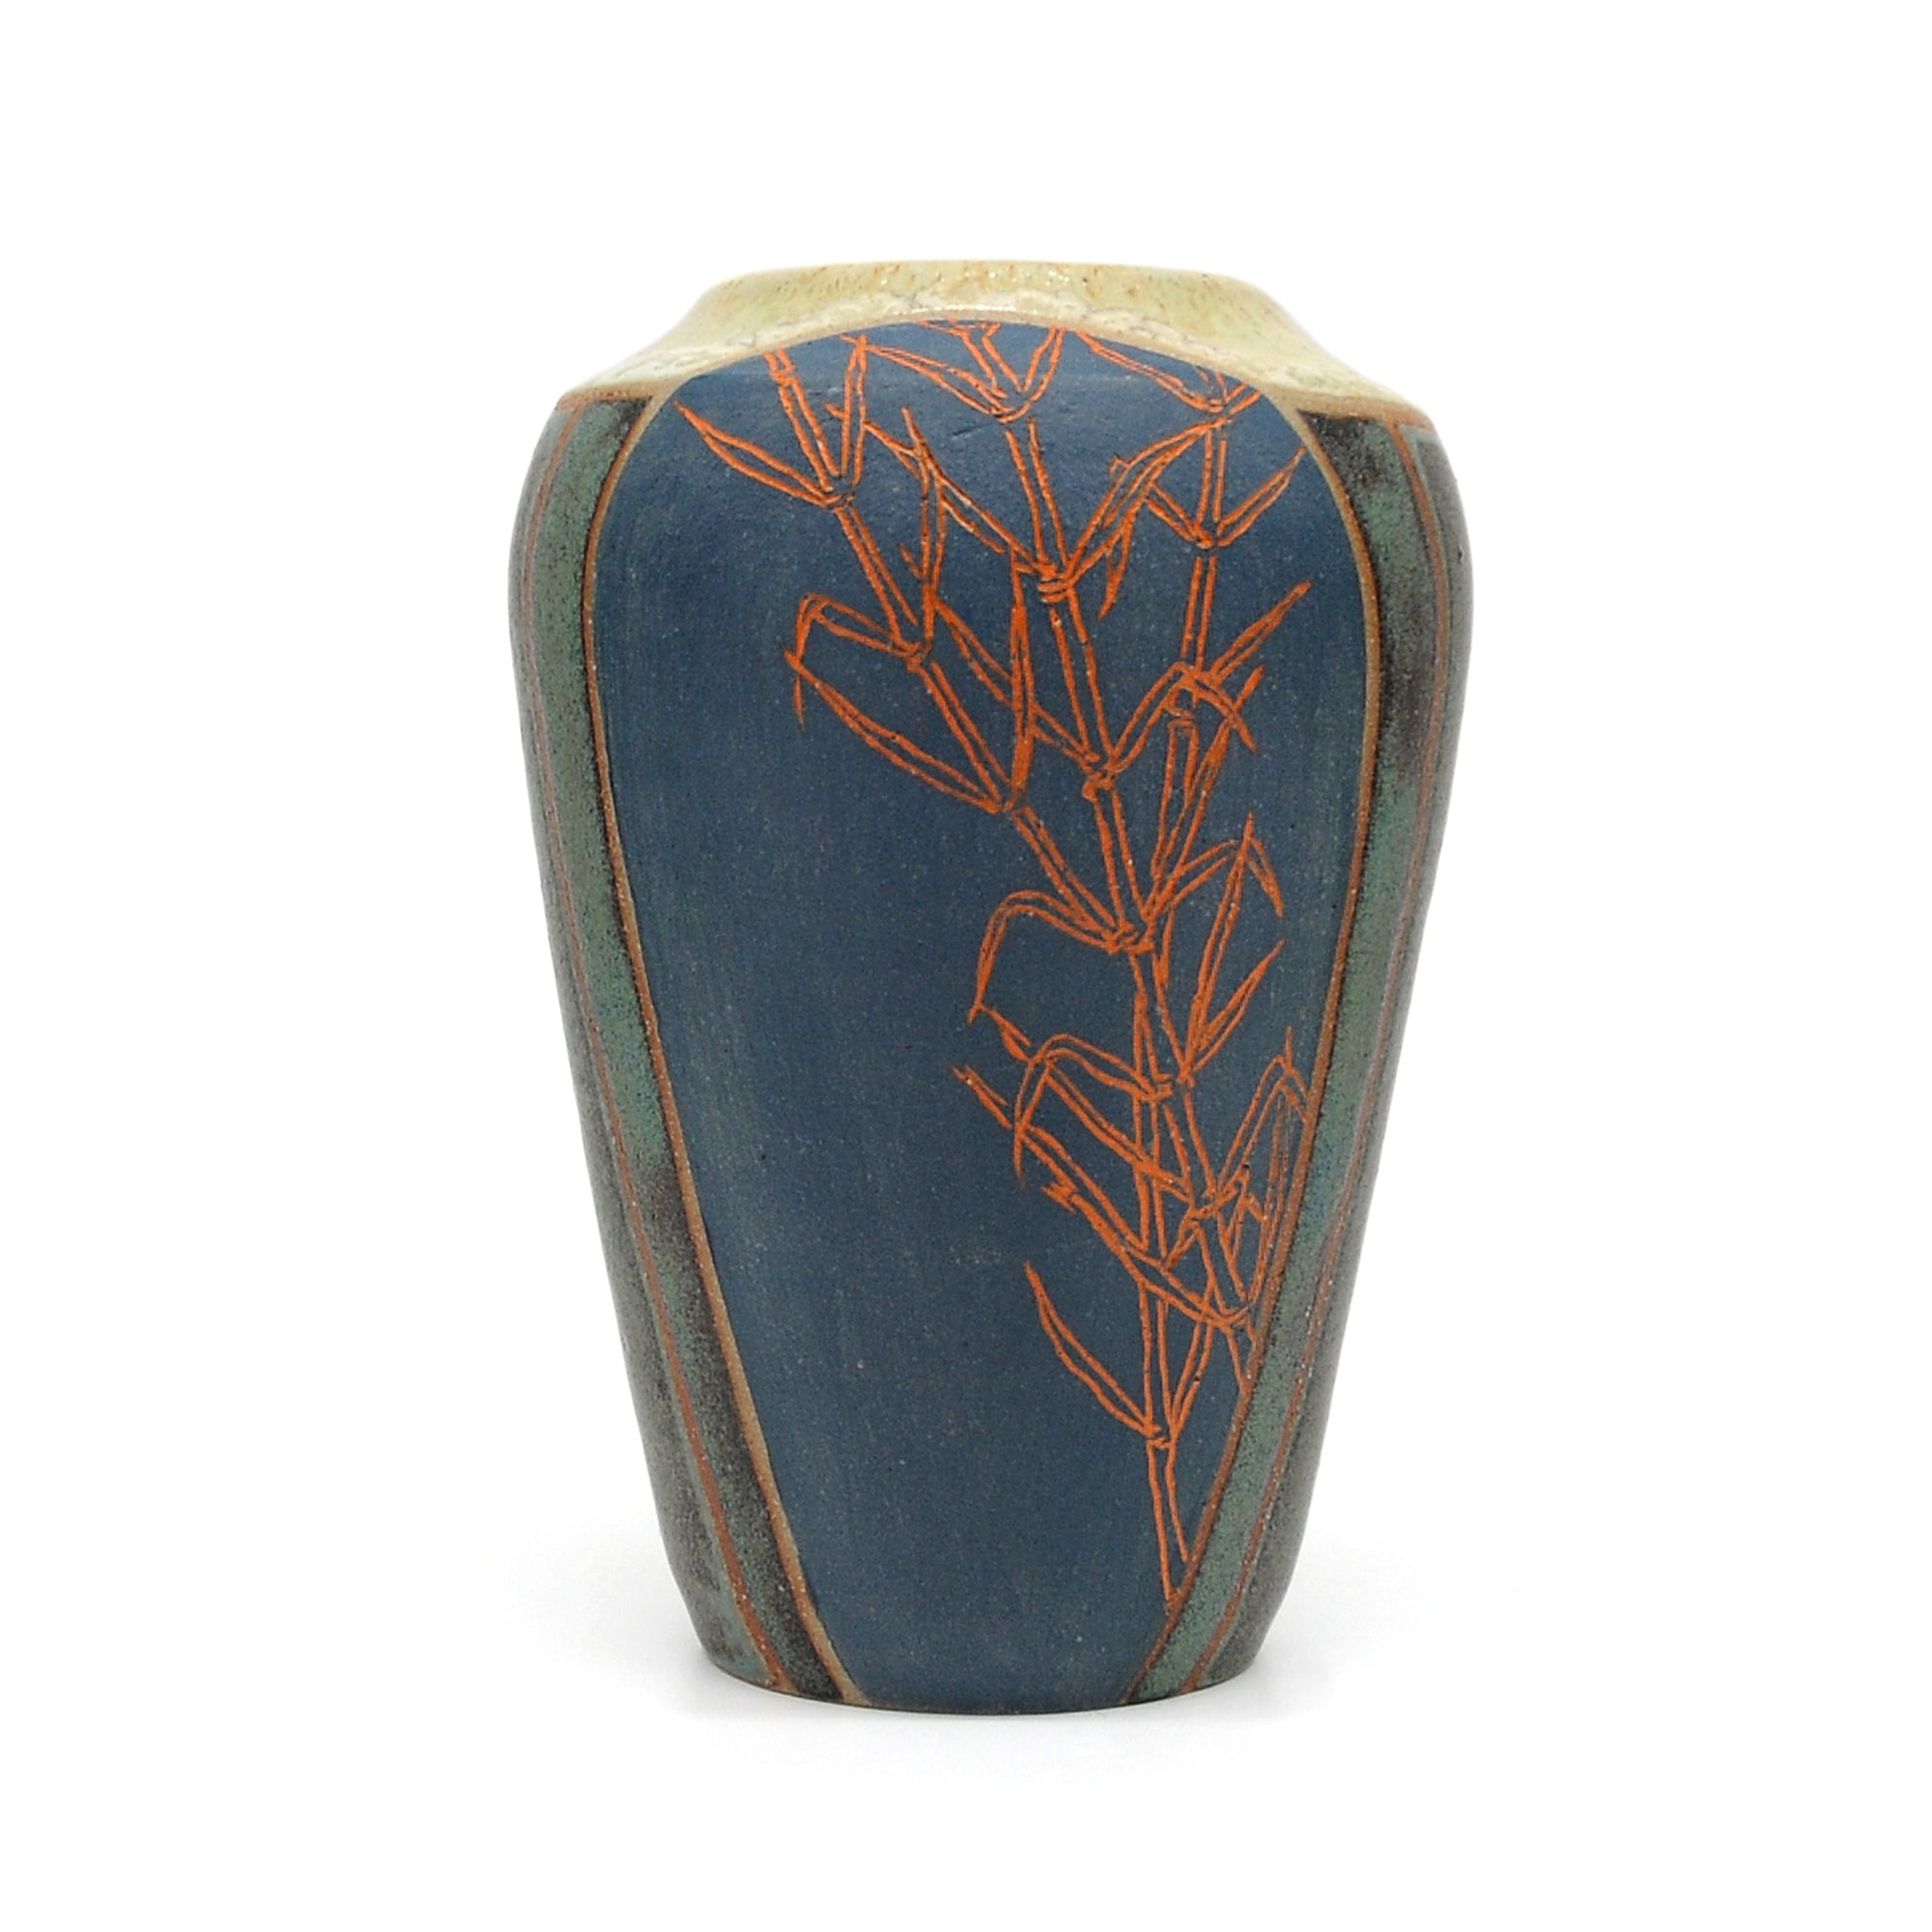 MK23 Vase by Miae Kim available at Padstow Gallery, Cornwall